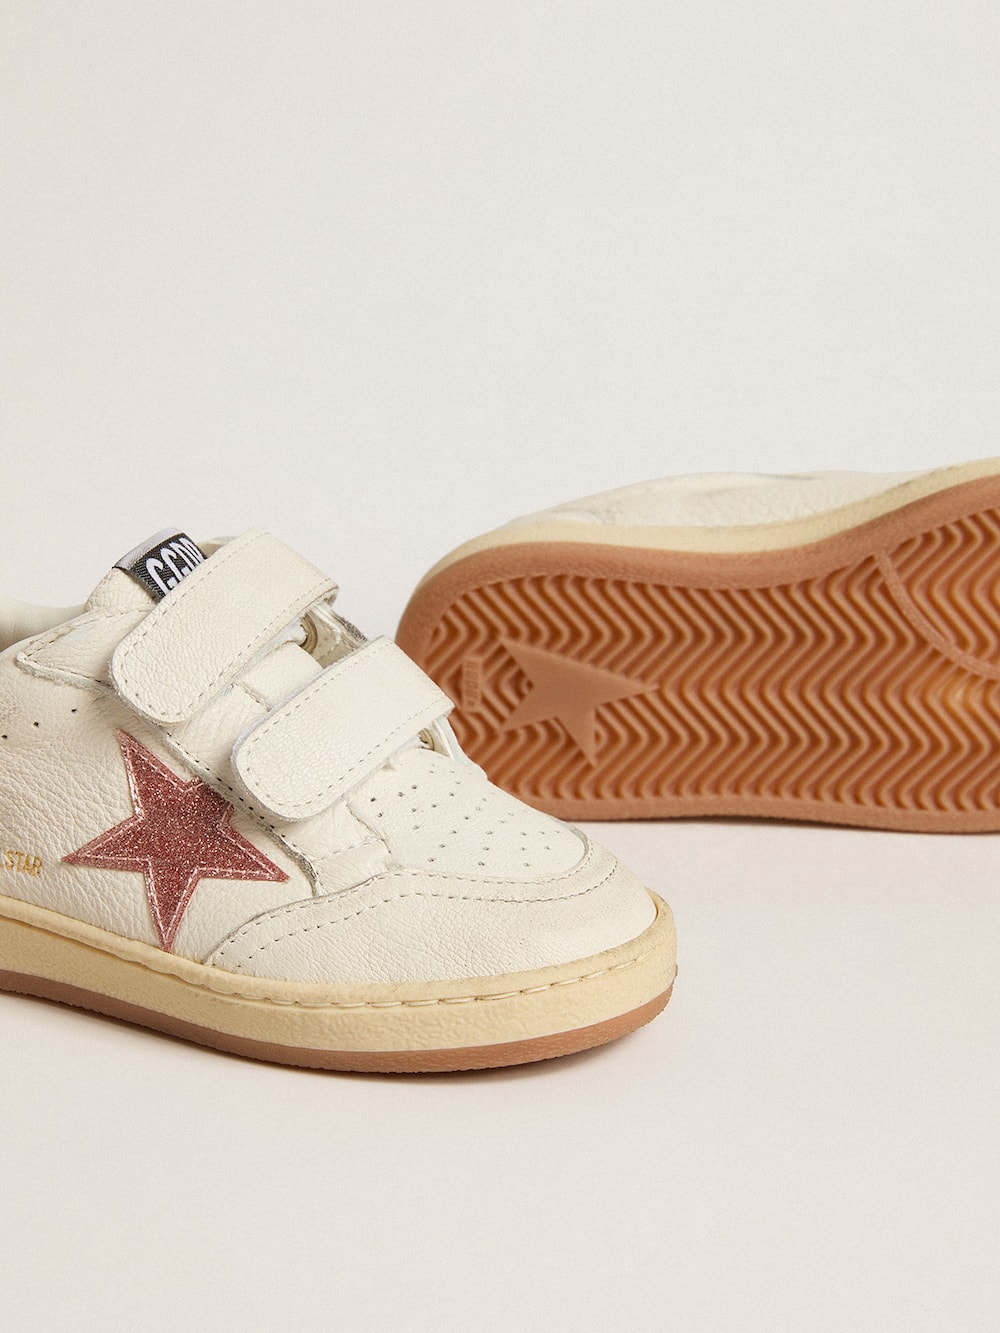 Golden Goose - Ball Star Young in nappa with peach-pink glitter star and heel tab in 